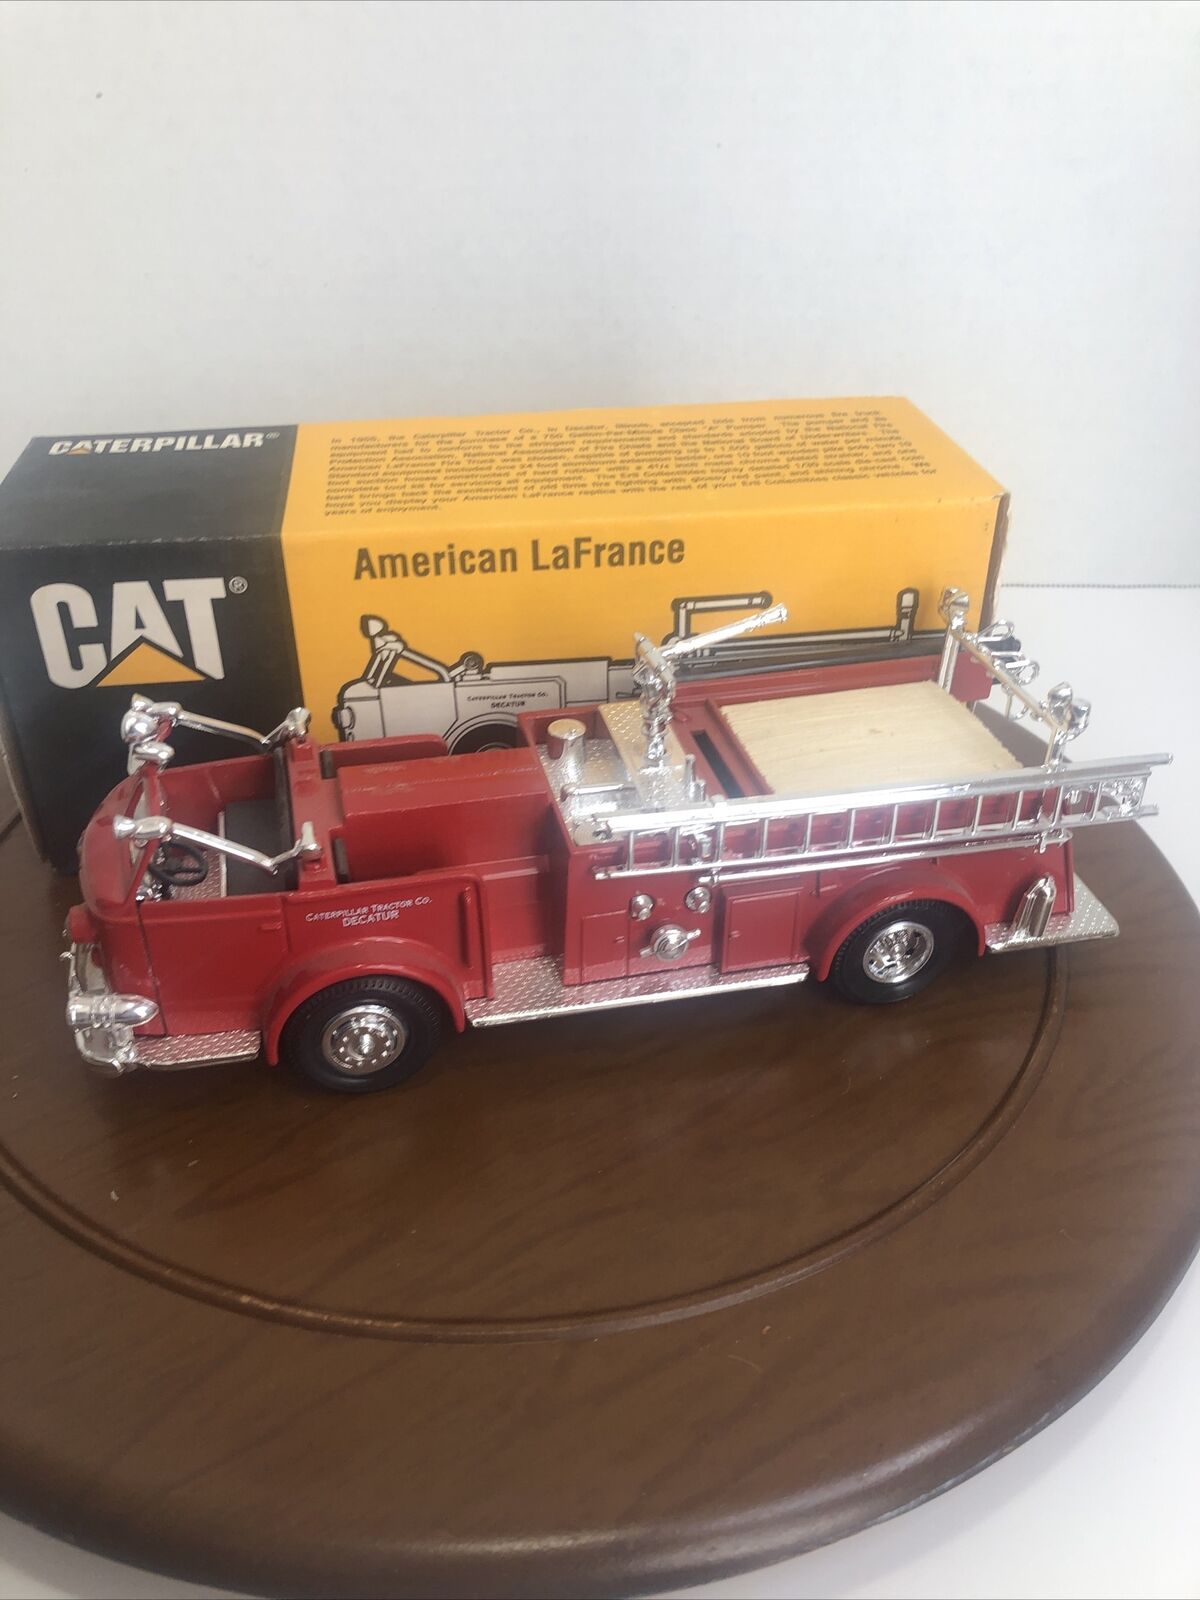 CATERPILLER AMERICAN LAFRANCE FIRE TRUCK DIECAST BANK USED IN BOX BY ERTL 1996